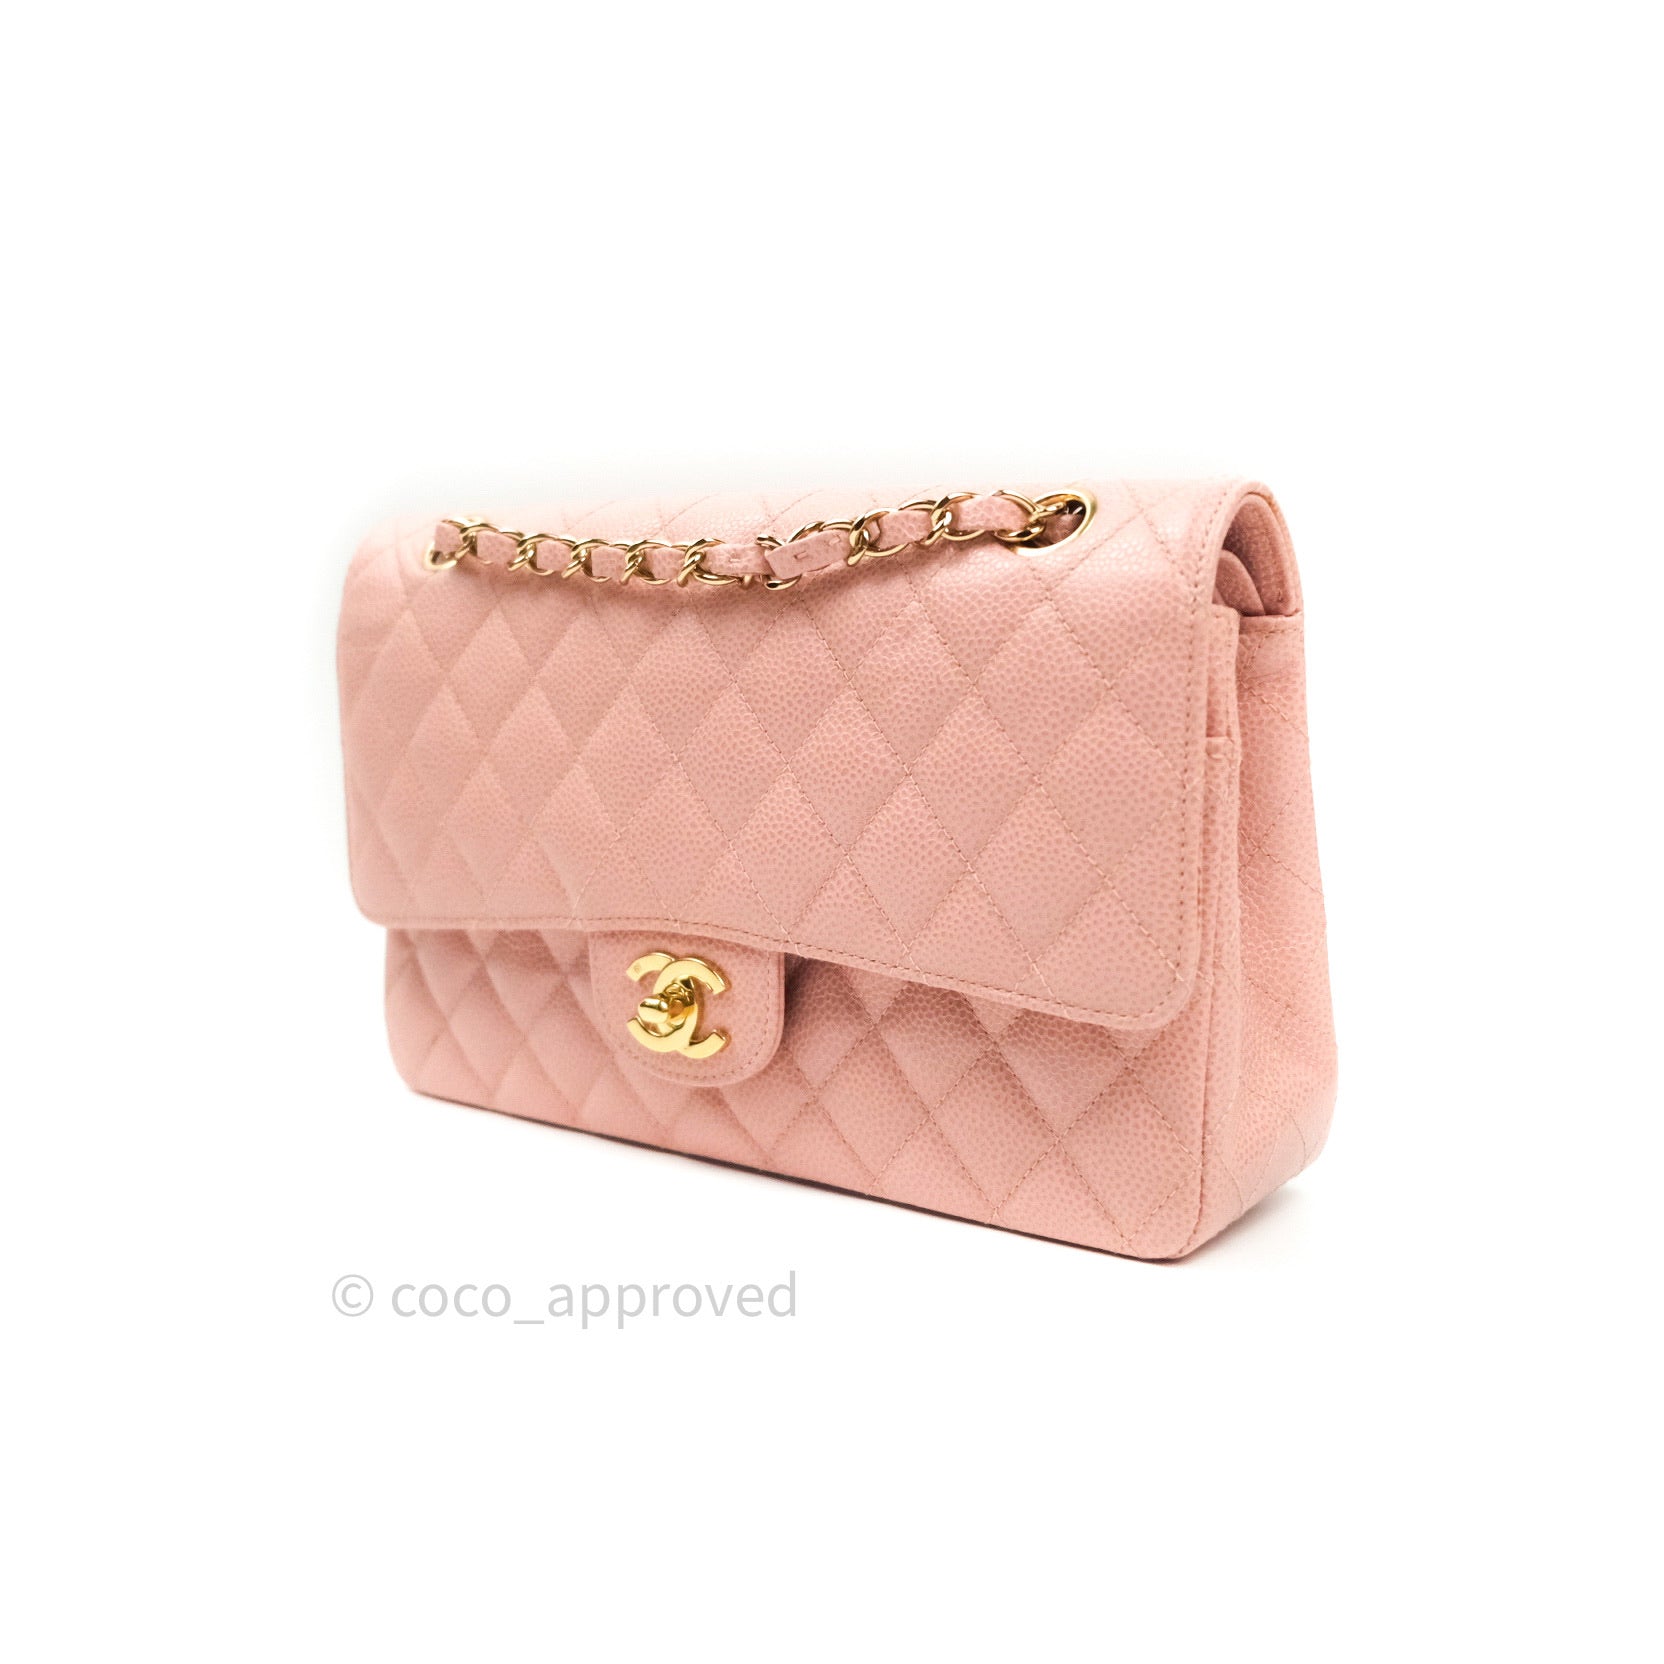 Pre-Owned Chanel Jersey Classic Single Flap SHWMedium Pink 